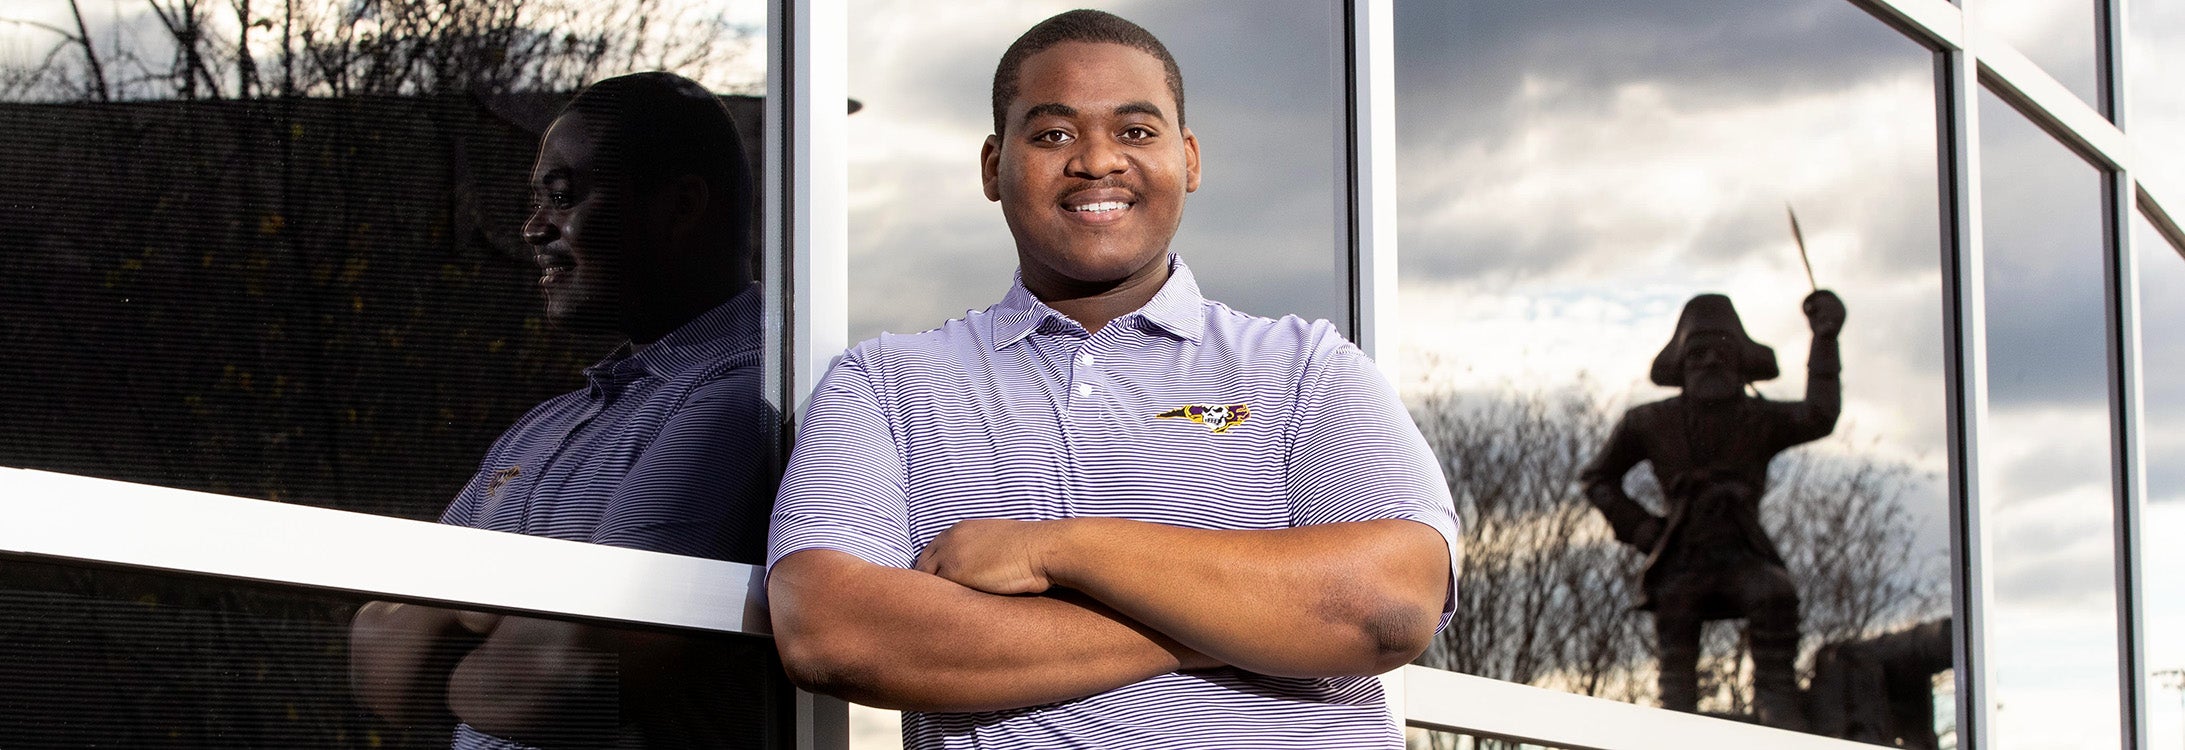 Shydeik Wood is a first-generation student from Wilmington who became involved while at ECU to get a sense of belonging on campus.